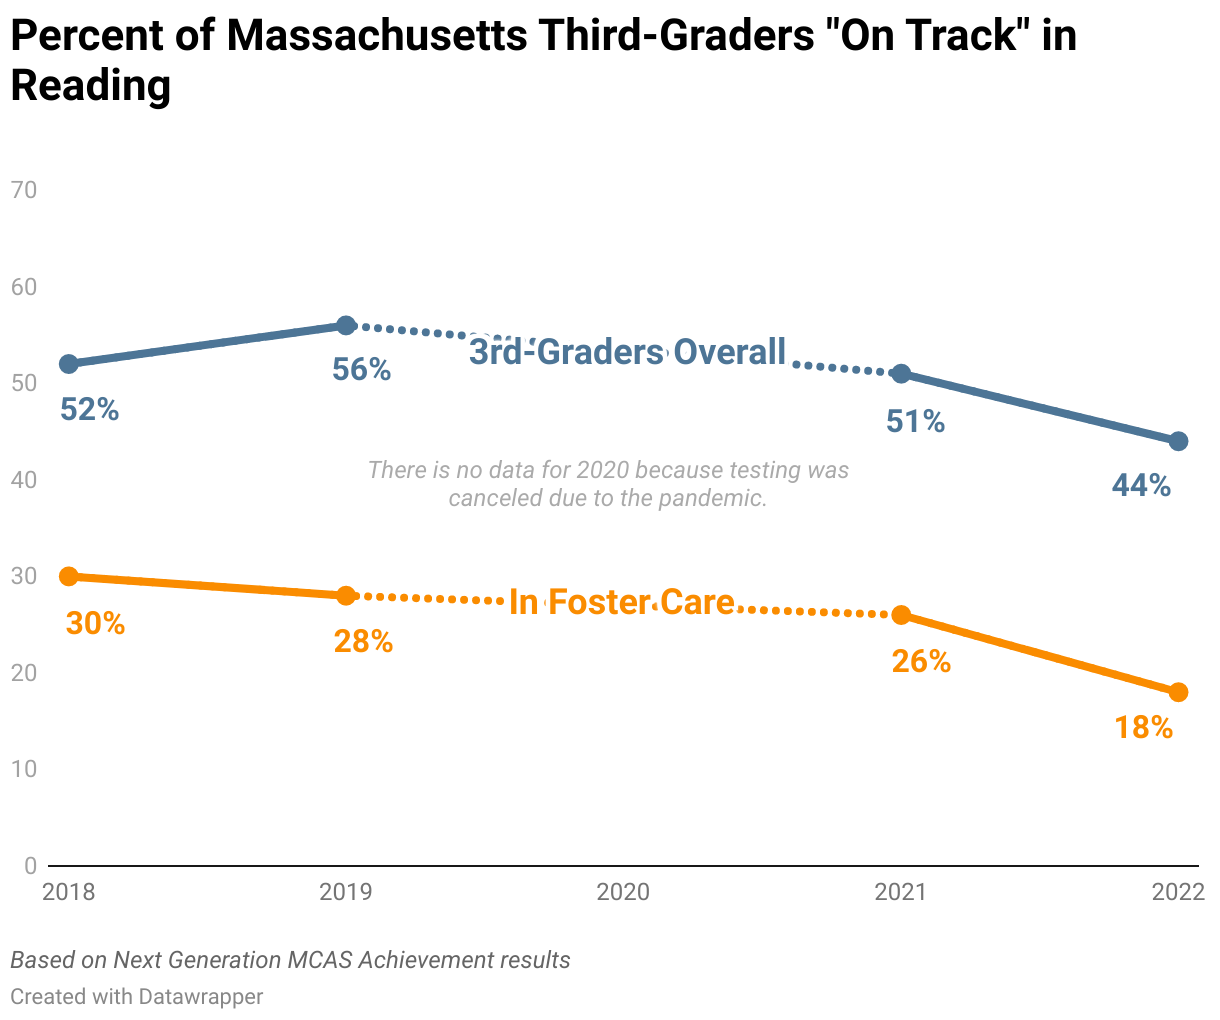 A double line graph showing the disparities in third-grade reading test scores in Massachusetts between third-graders overall and third-graders experiencing foster care. Children in foster care consistently score significantly lower than their peers. In 2018, there was a 22 percentage point disparity. In 2019, there was a 28 percentage point disparity. There is no data for 2020 because testing was canceled due to the pandemic. In 2021, there was a 25 percentage point disparity. And most recently, in 2022, there was a 26 percentage point disparity.